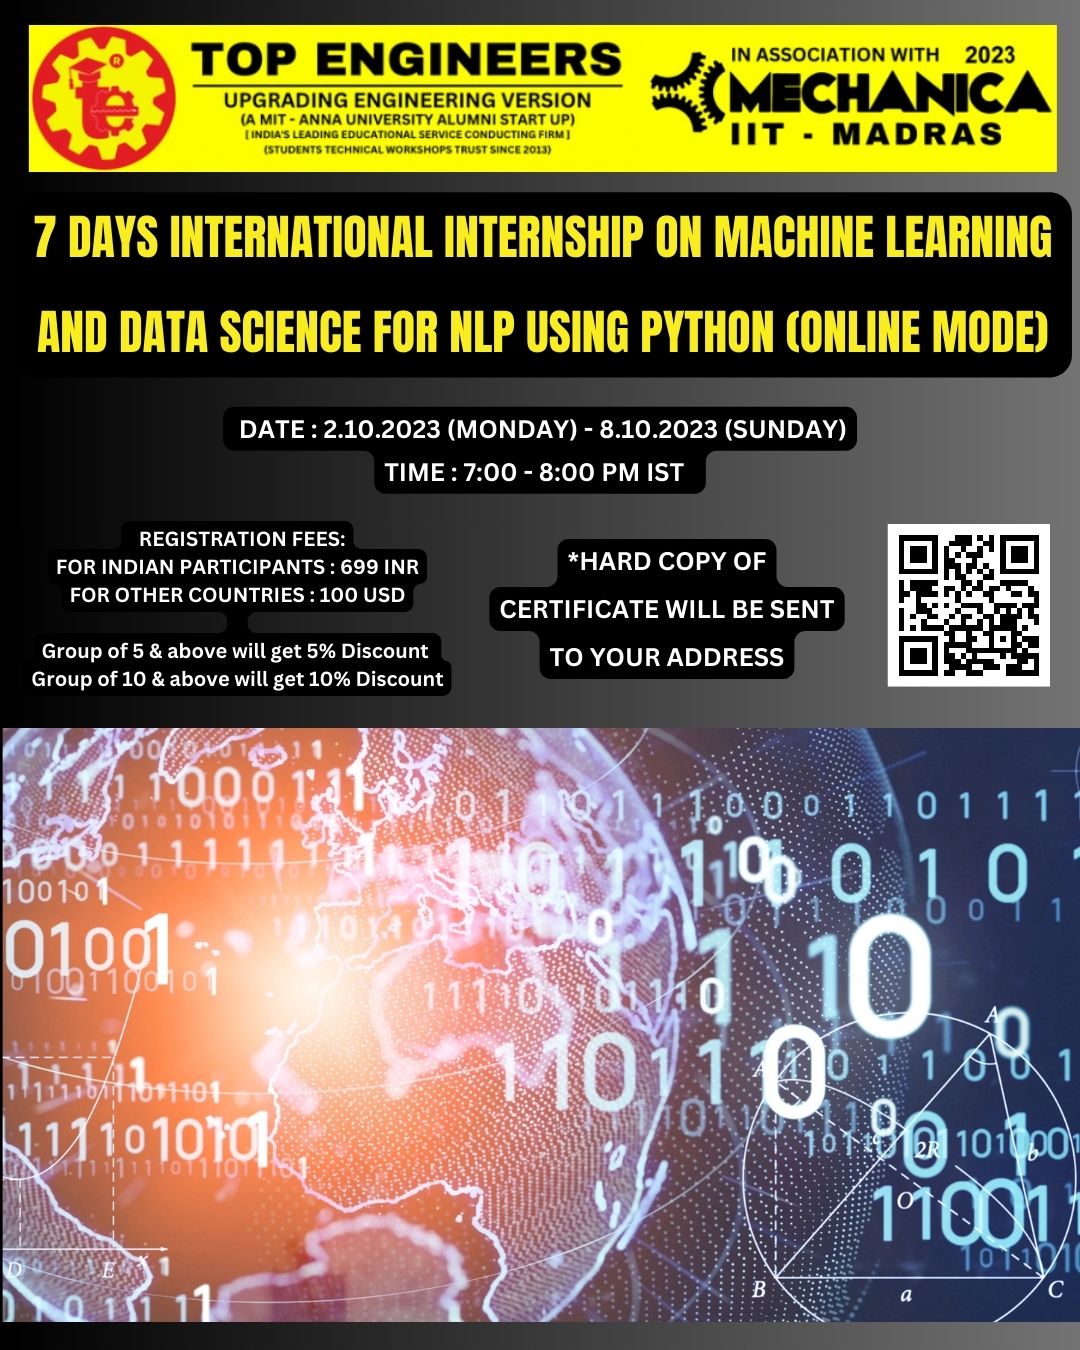 7 Days International Internship on Machine Learning and Data Science for NLP using Python (online Mode) 2023